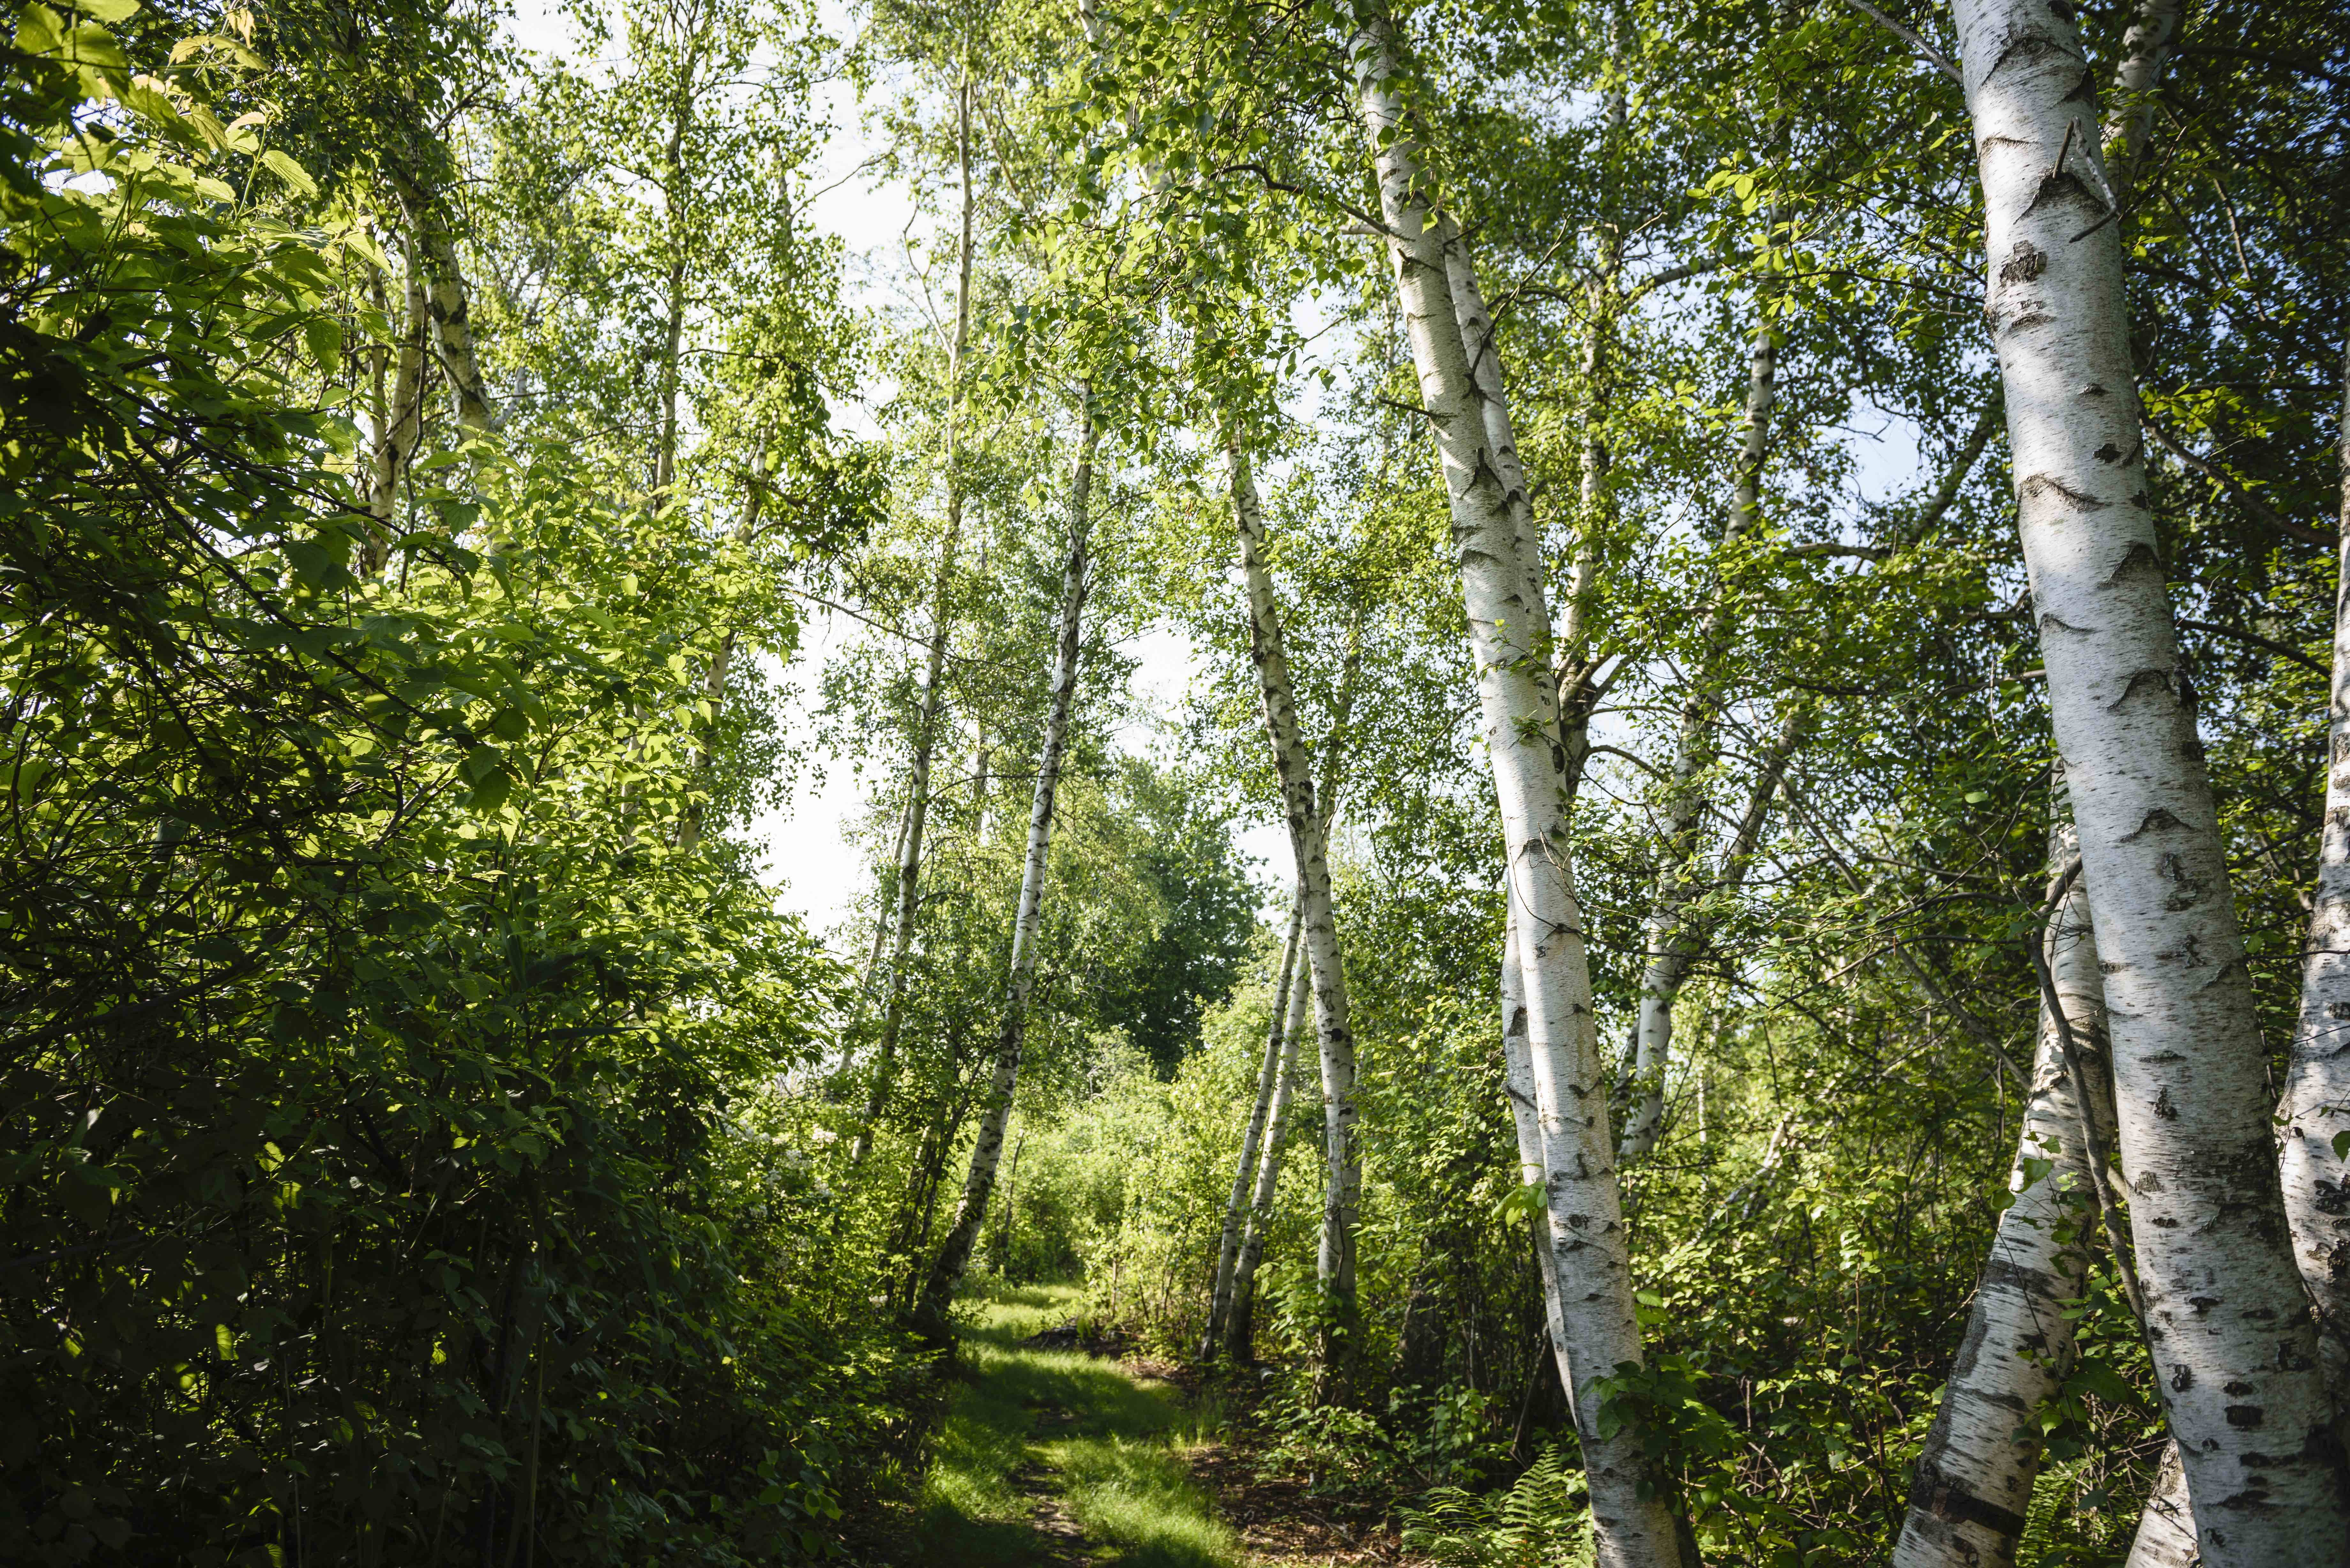 View looking down a path with green trees featuring white and brown trunks on each side.